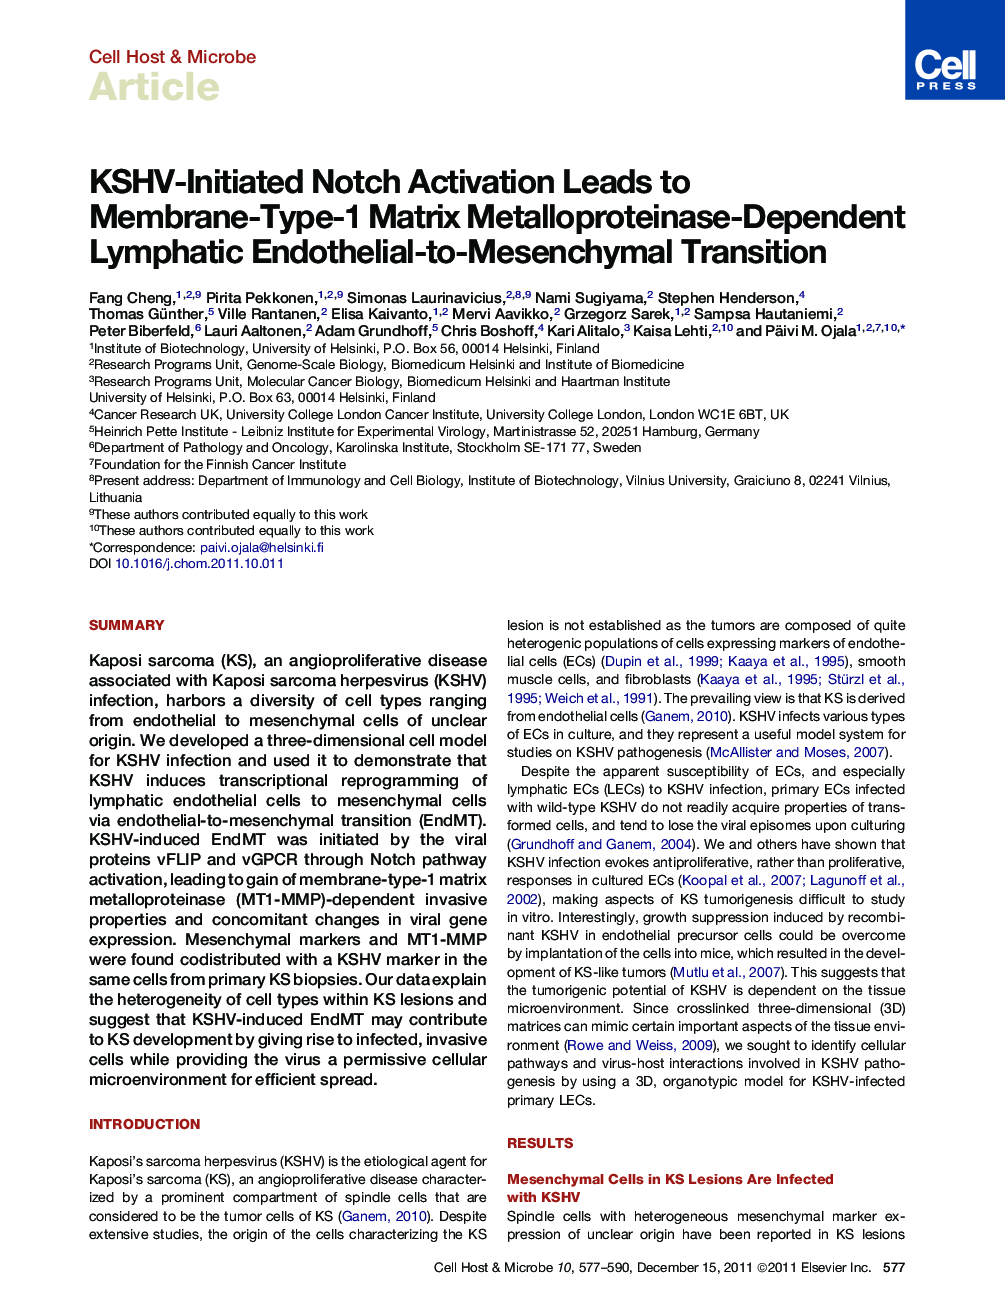 KSHV-Initiated Notch Activation Leads to Membrane-Type-1 Matrix Metalloproteinase-Dependent Lymphatic Endothelial-to-Mesenchymal Transition